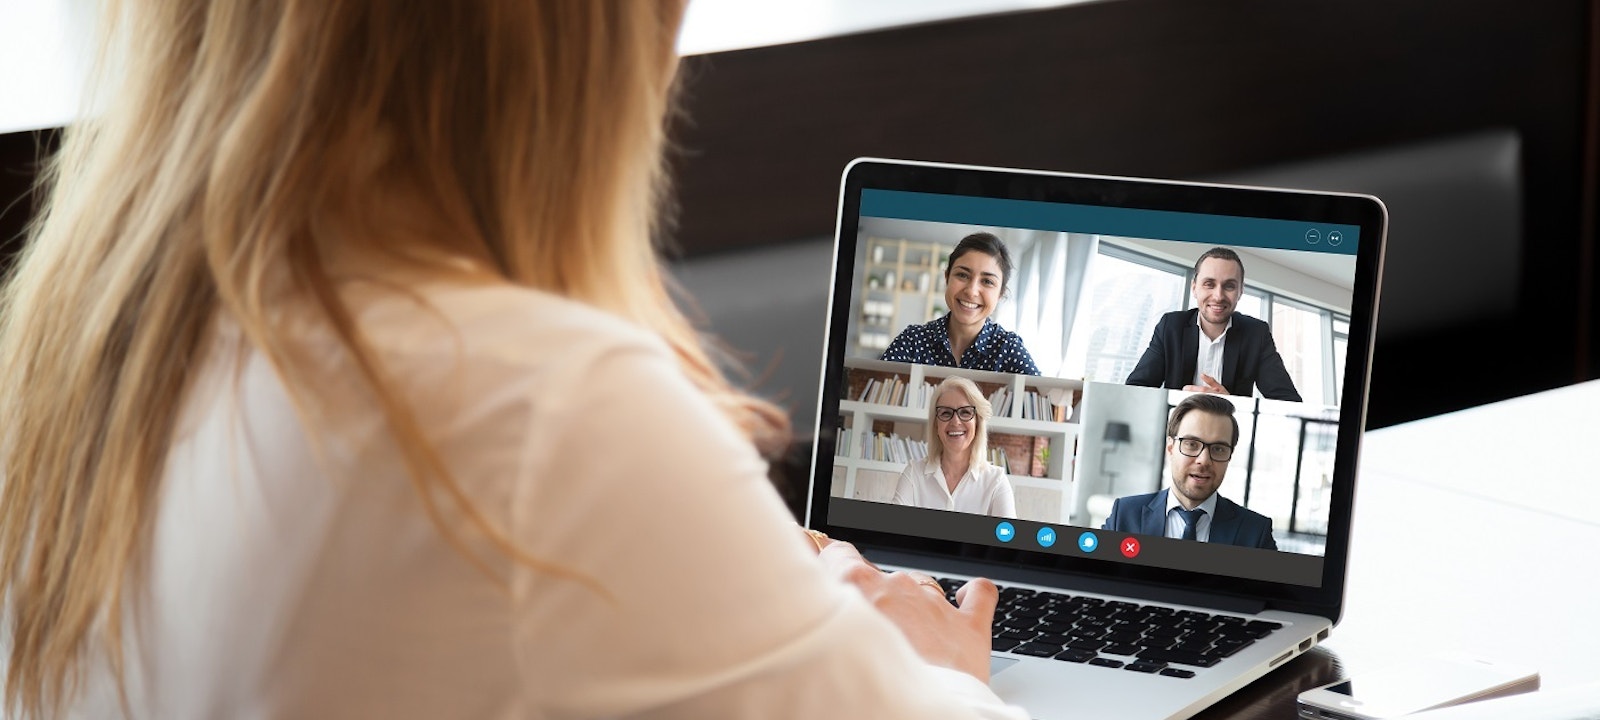 Woman video conferencing